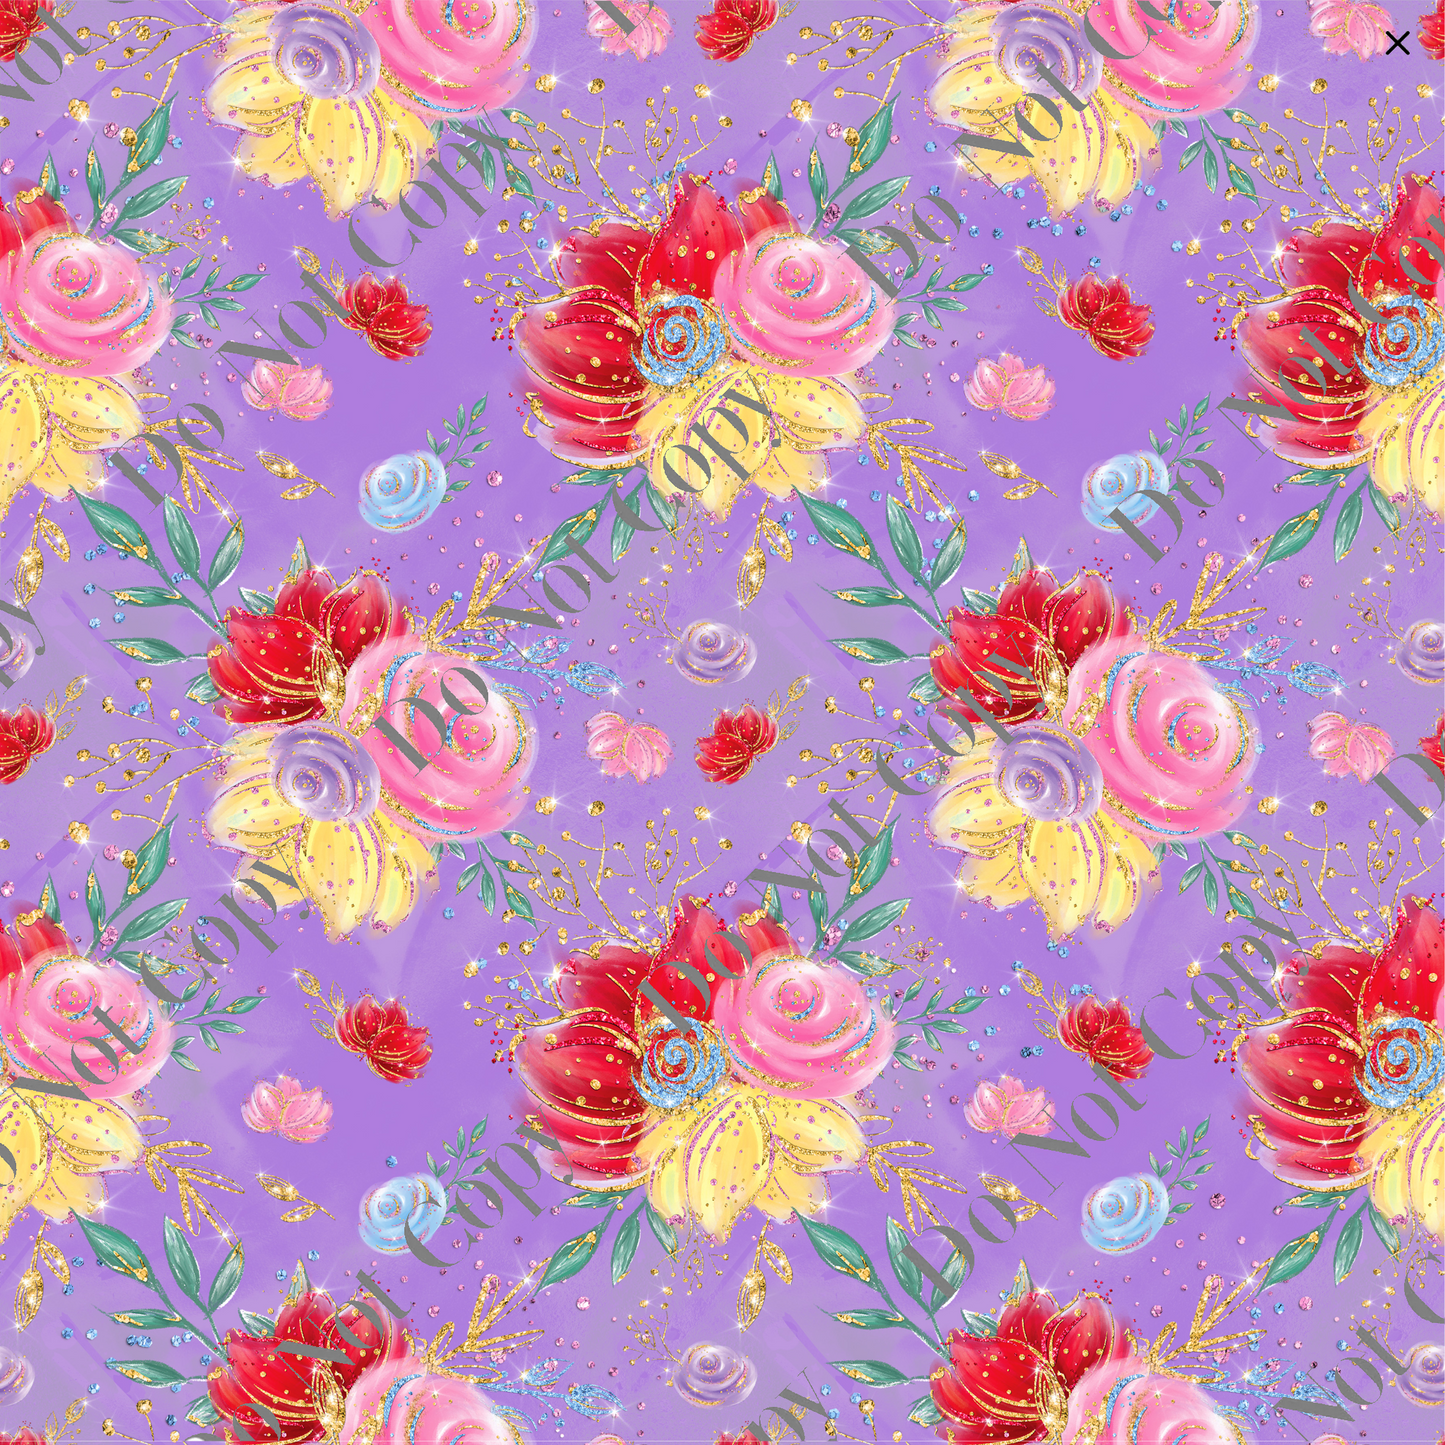 Patterned Vinyl - Red, Pink & Yellow Floral (purple)